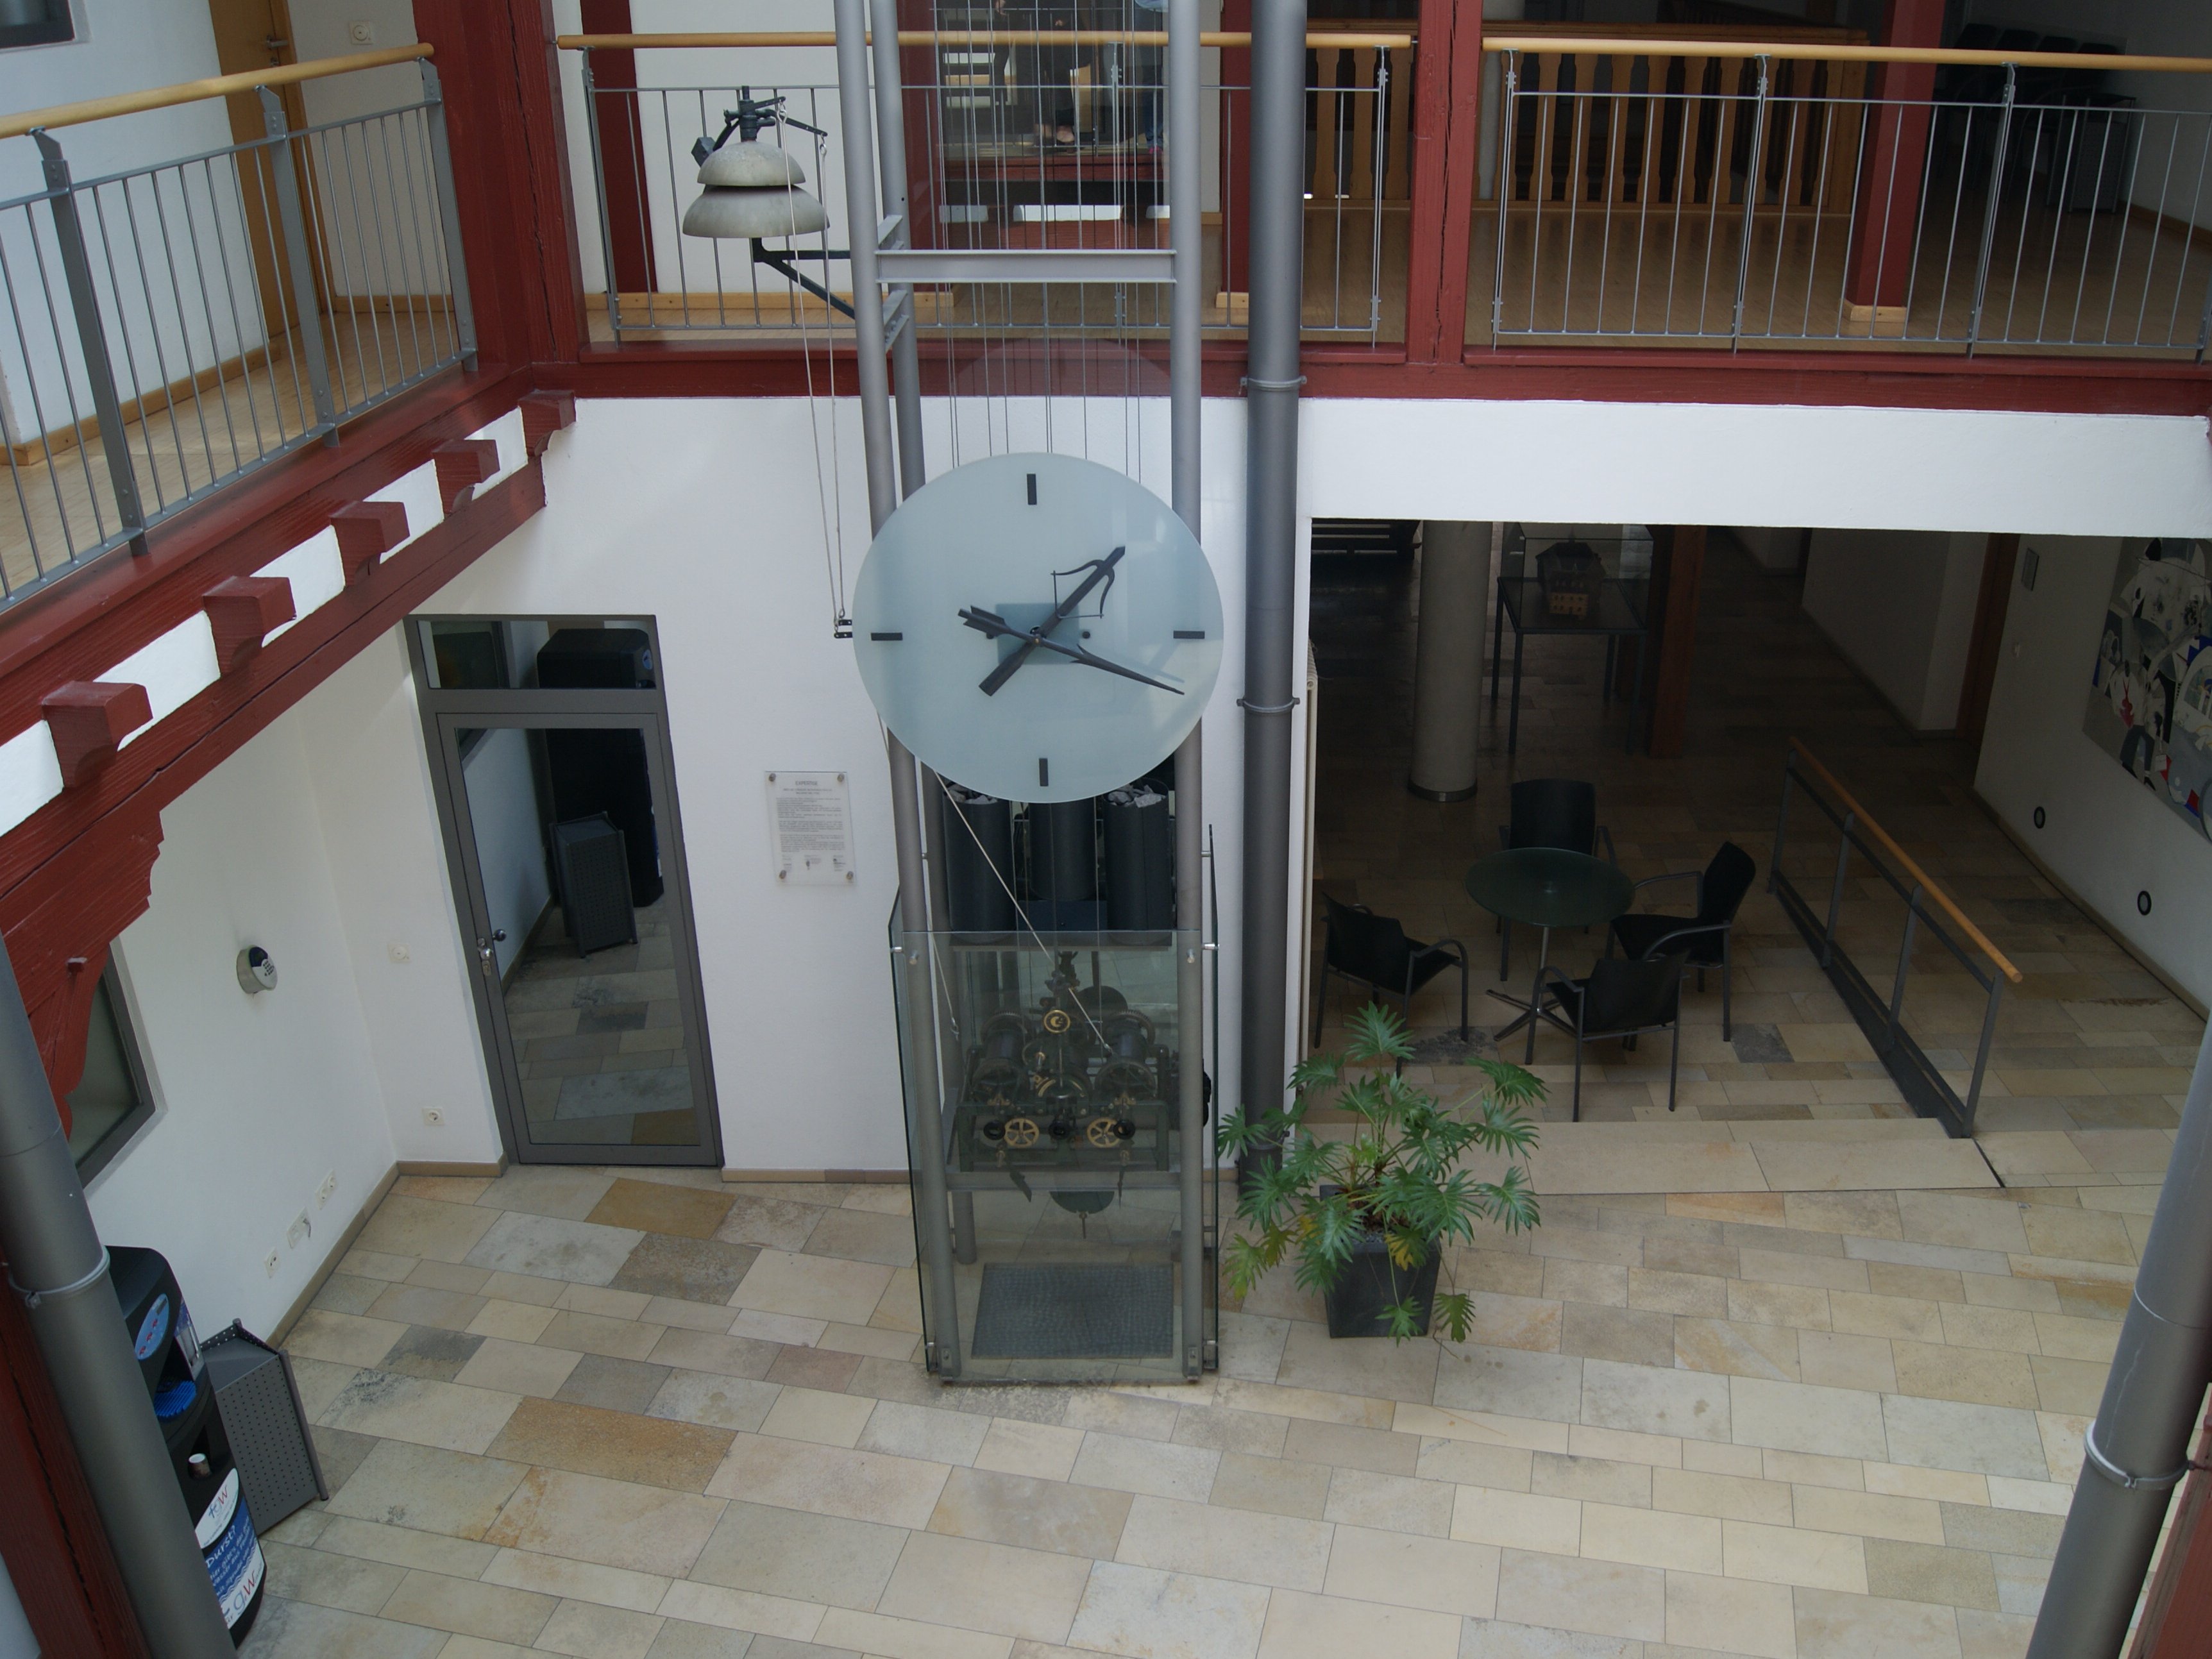 Atrium, interior in the town hall with old clock